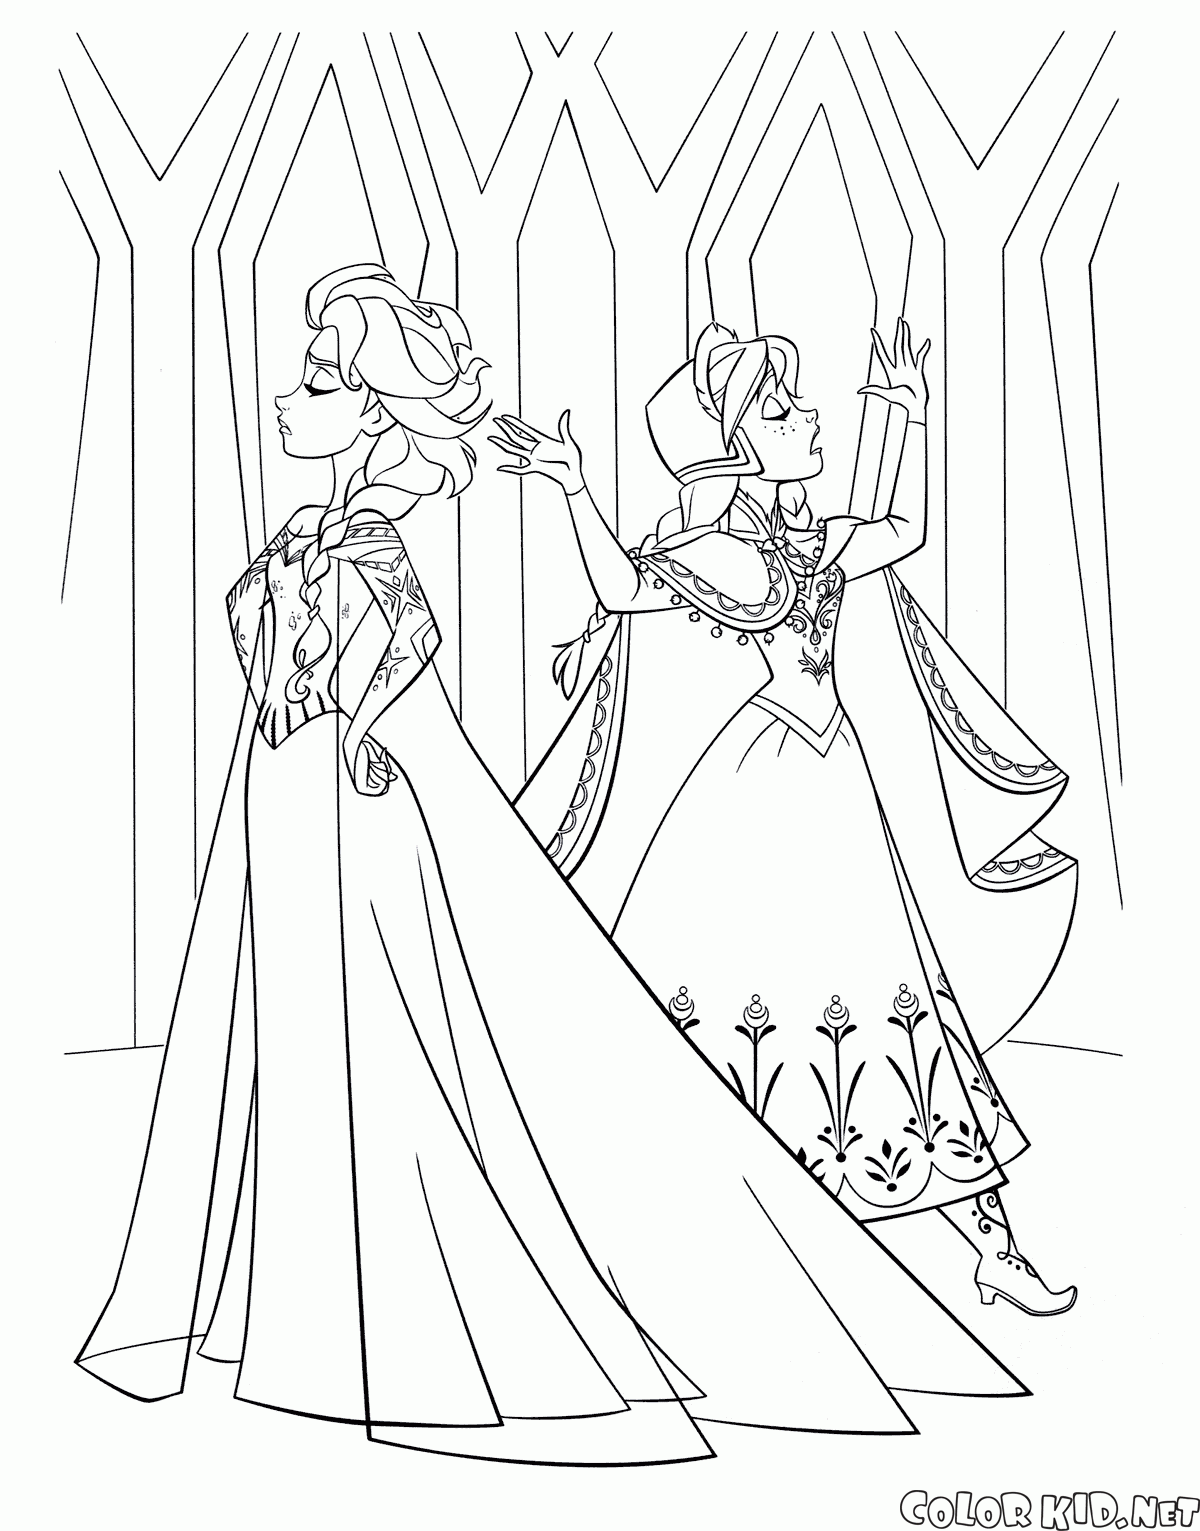 Elsa and Anna in the castle